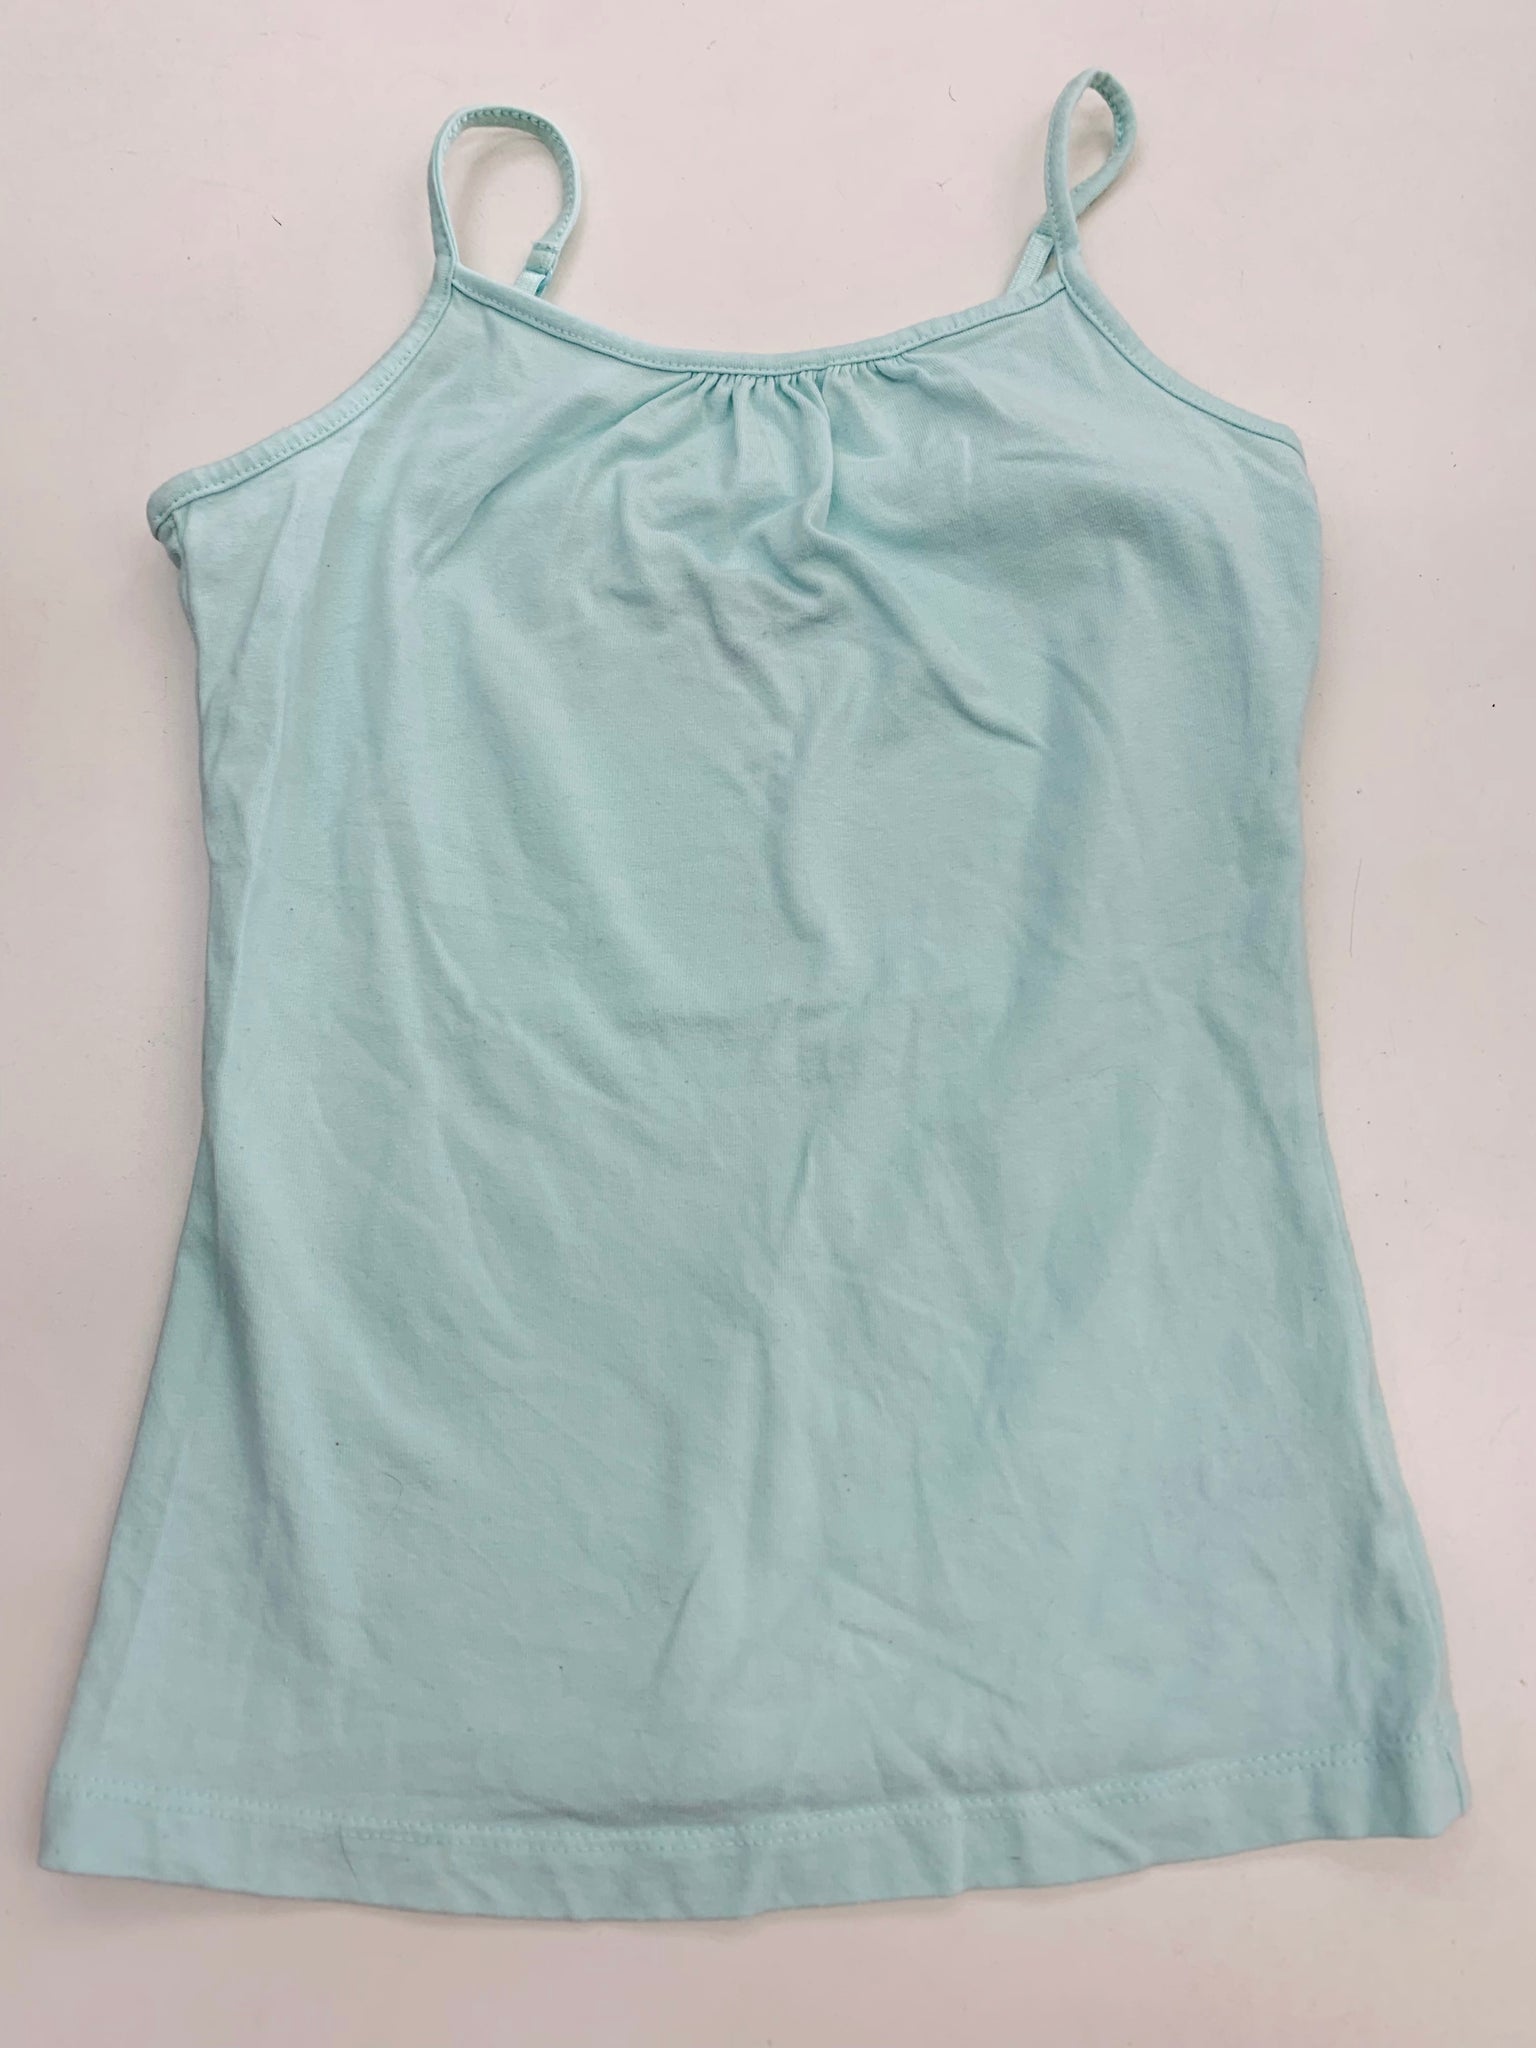 Girls Tank Top Camisole Cat and Jack 6